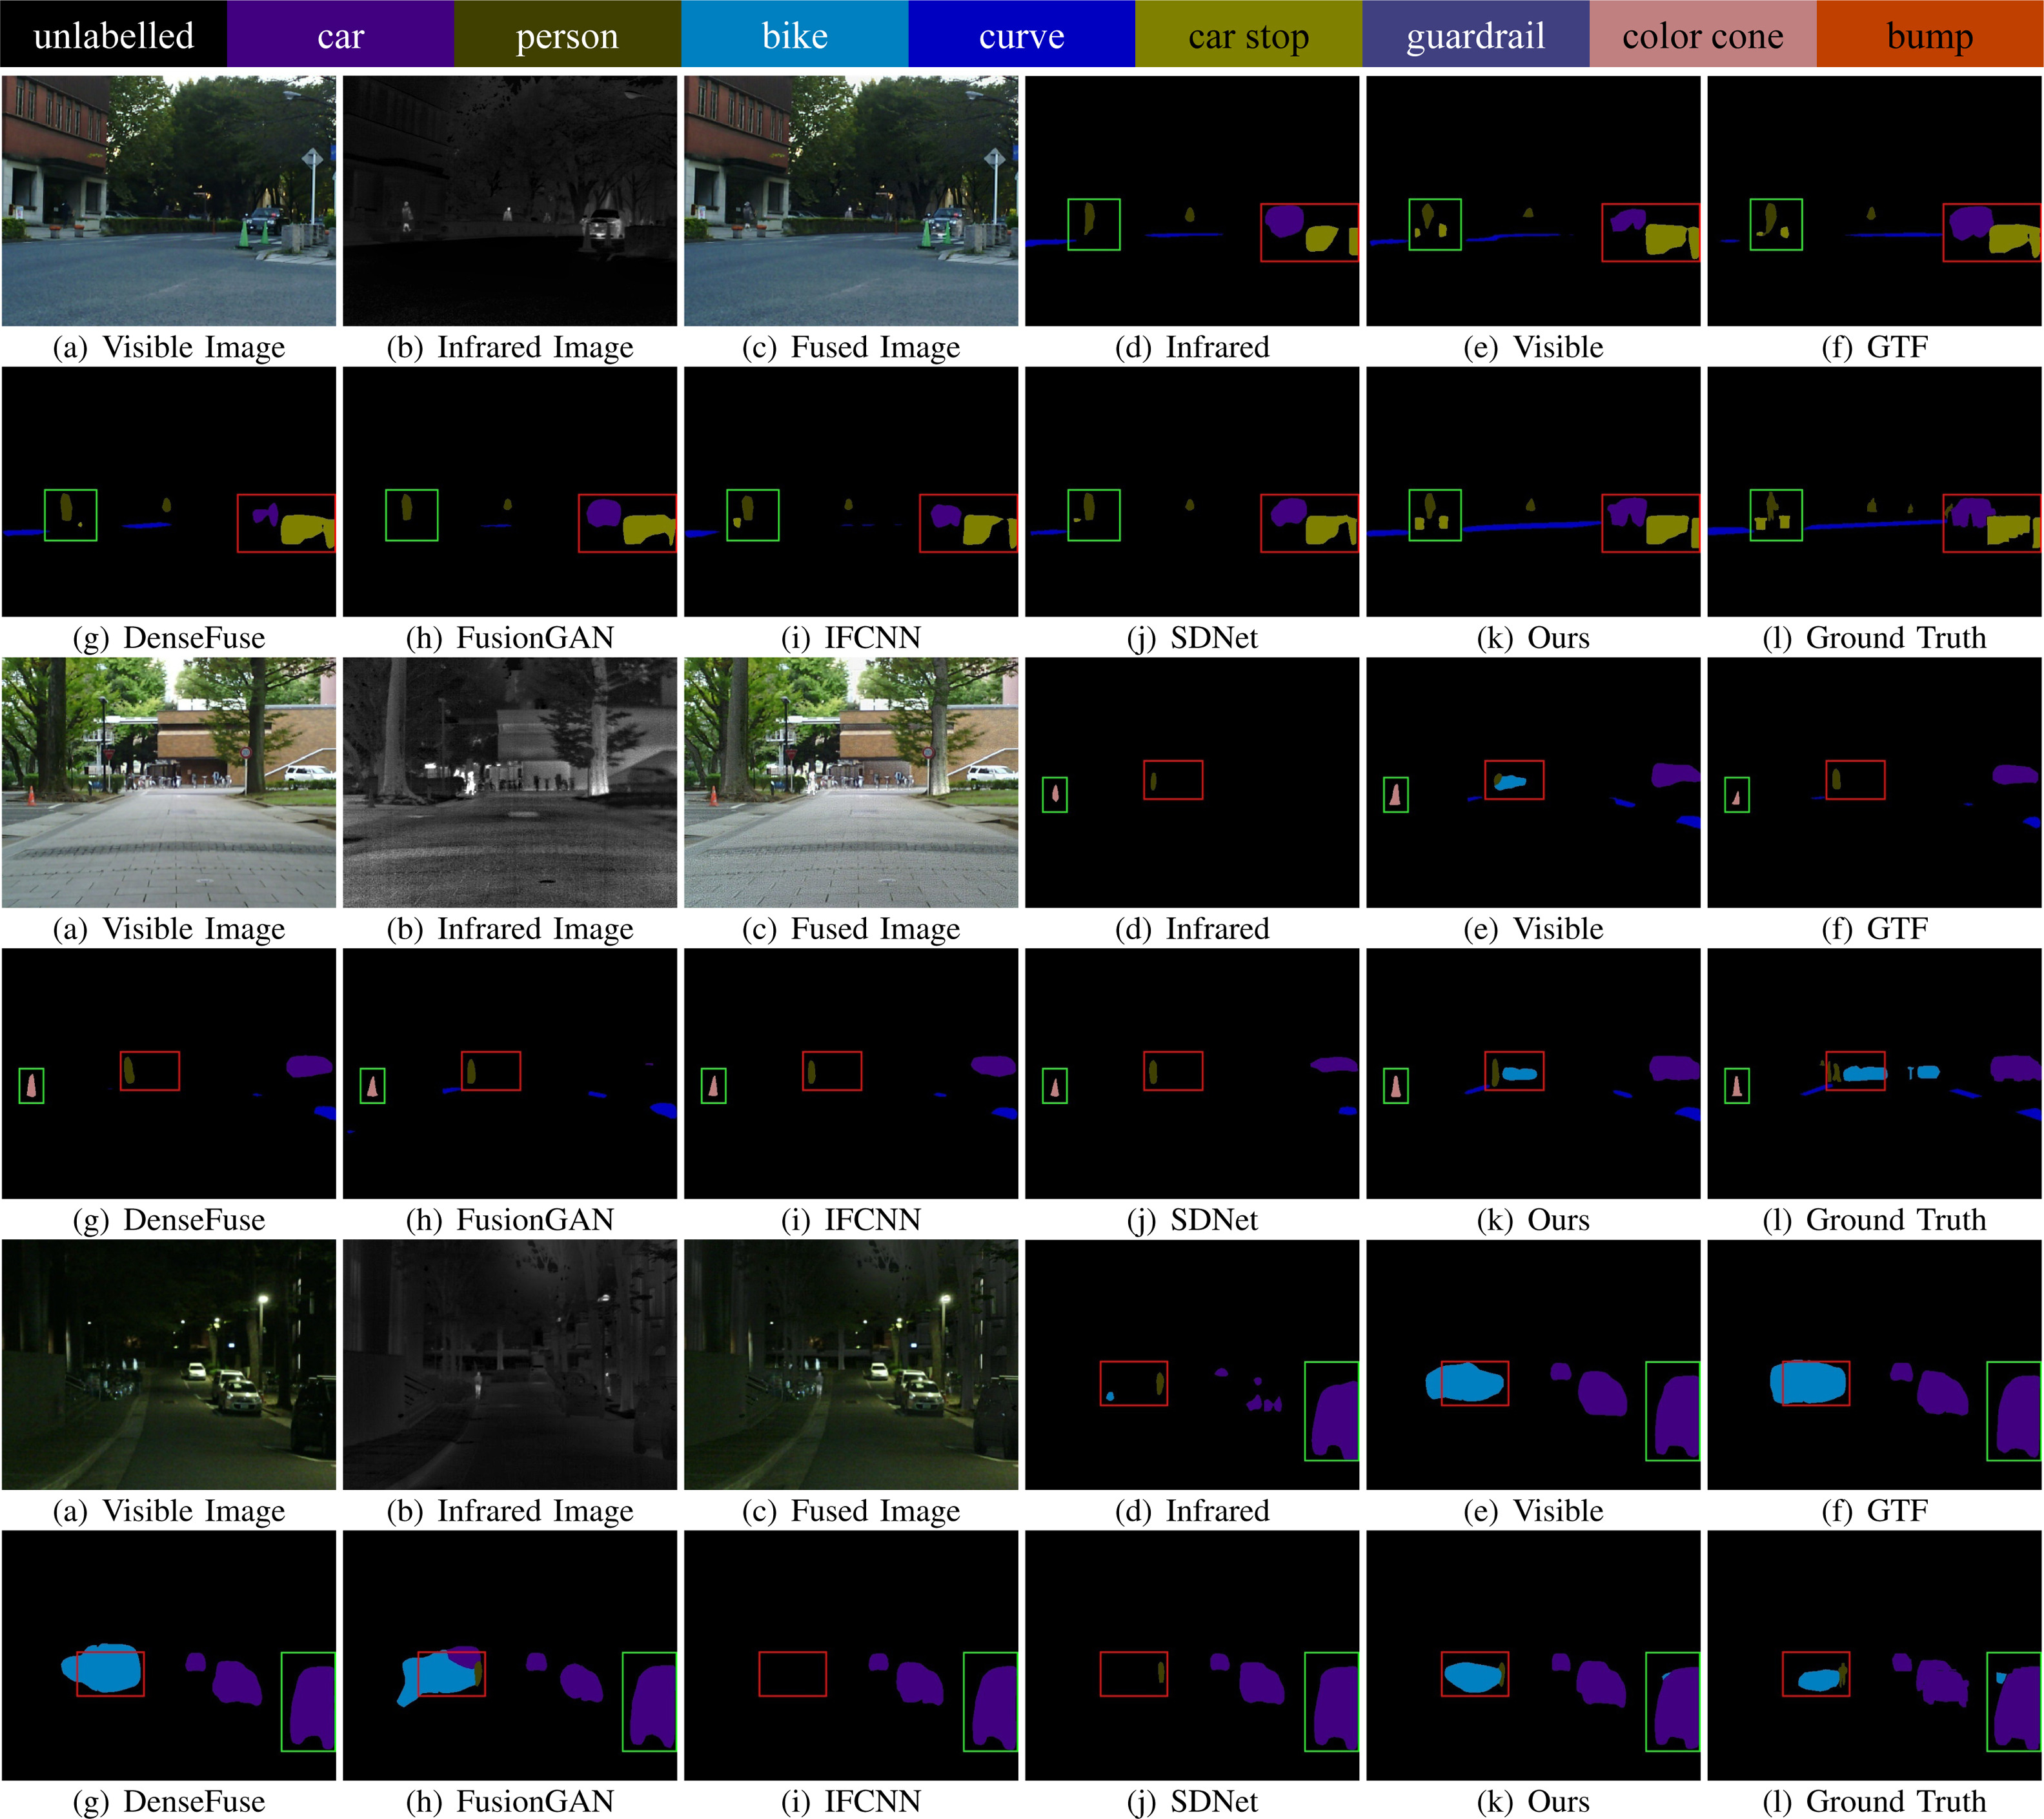 Segmentation results for infrared, visible and fused images from the MFNet dataset. The segmentation models are re-trained on infrared, visible and fused image sets. Each two rows represent a scene, and from top to bottom is: \emph{00127D}, \emph{00504D} and \emph{01066N}.